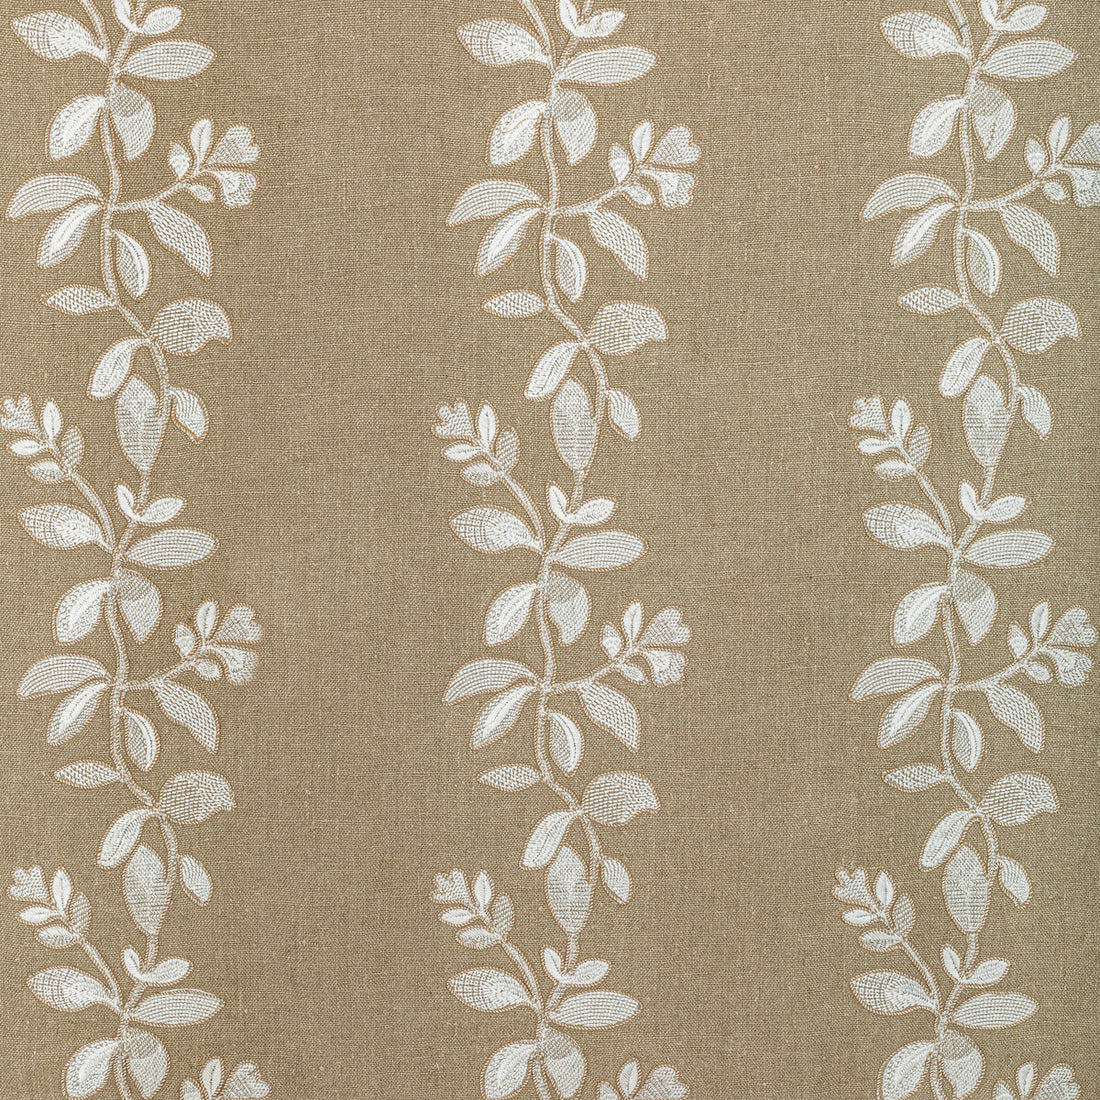 Gingerflower fabric in linen color - pattern 36380.1601.0 - by Kravet Couture in the Barbara Barry Ojai collection